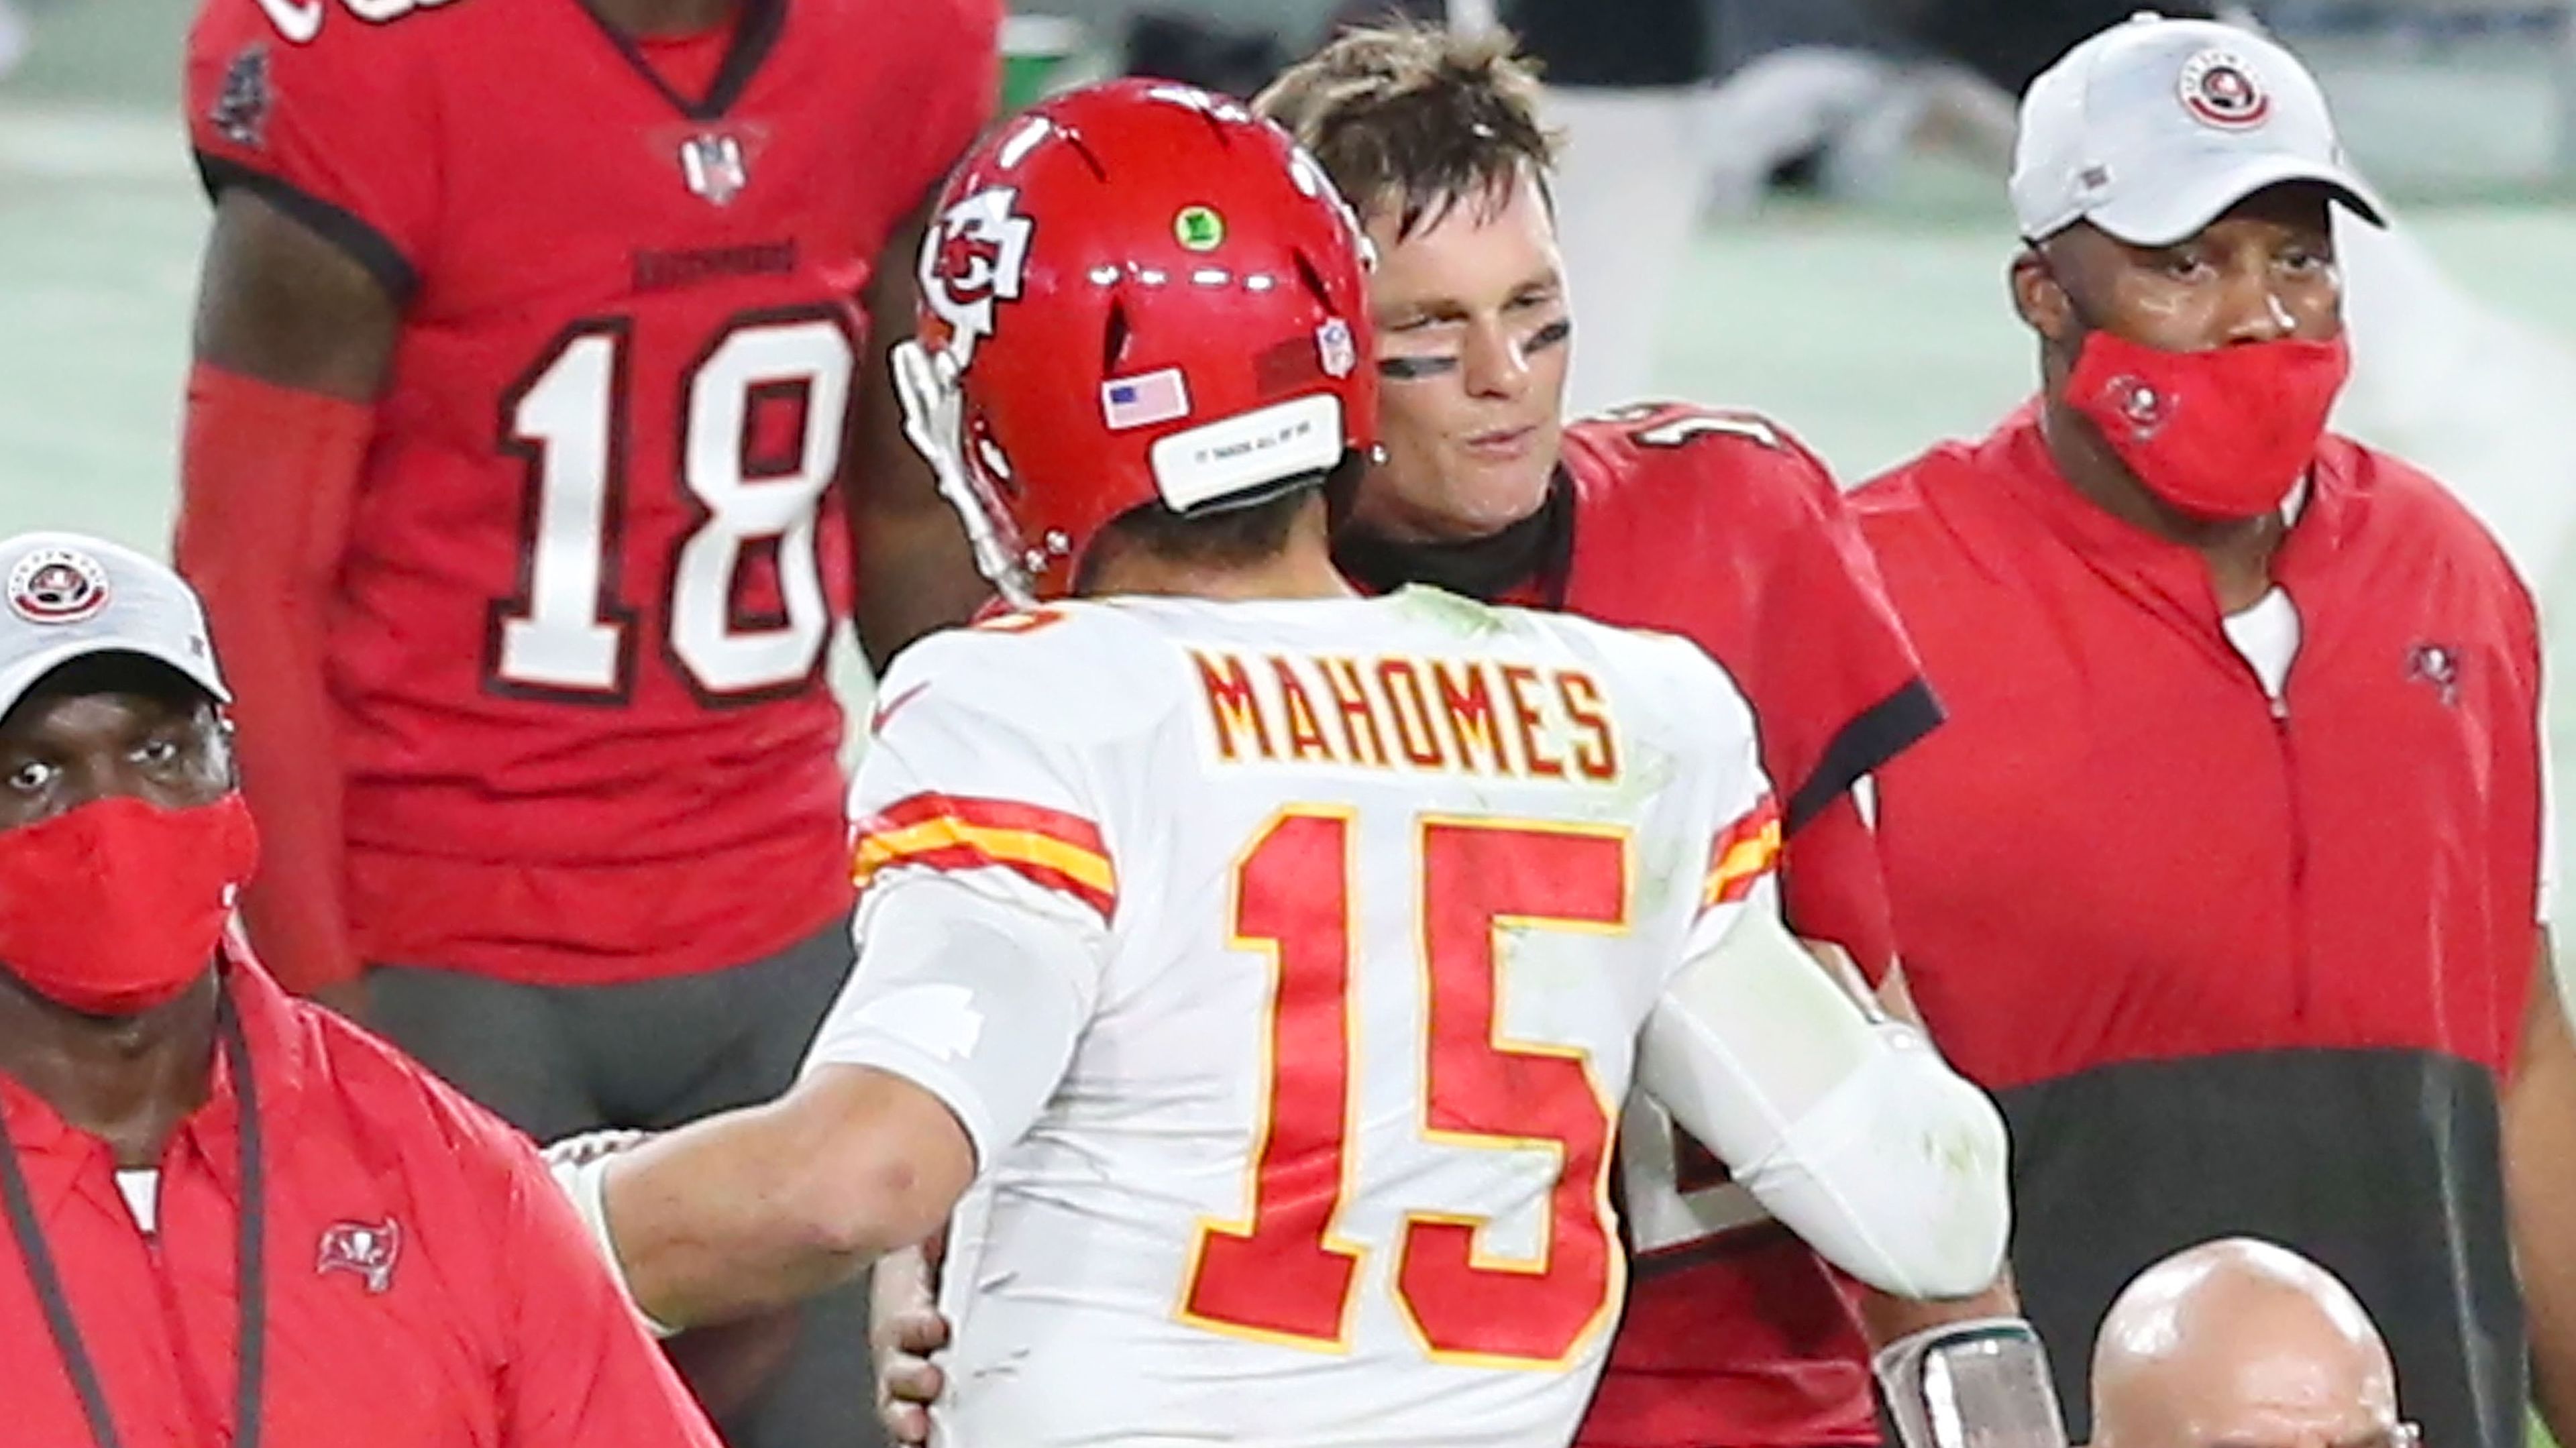 Tom Brady of the Buccaneers shakes hands with Patrick Mahomes of the Chiefs.